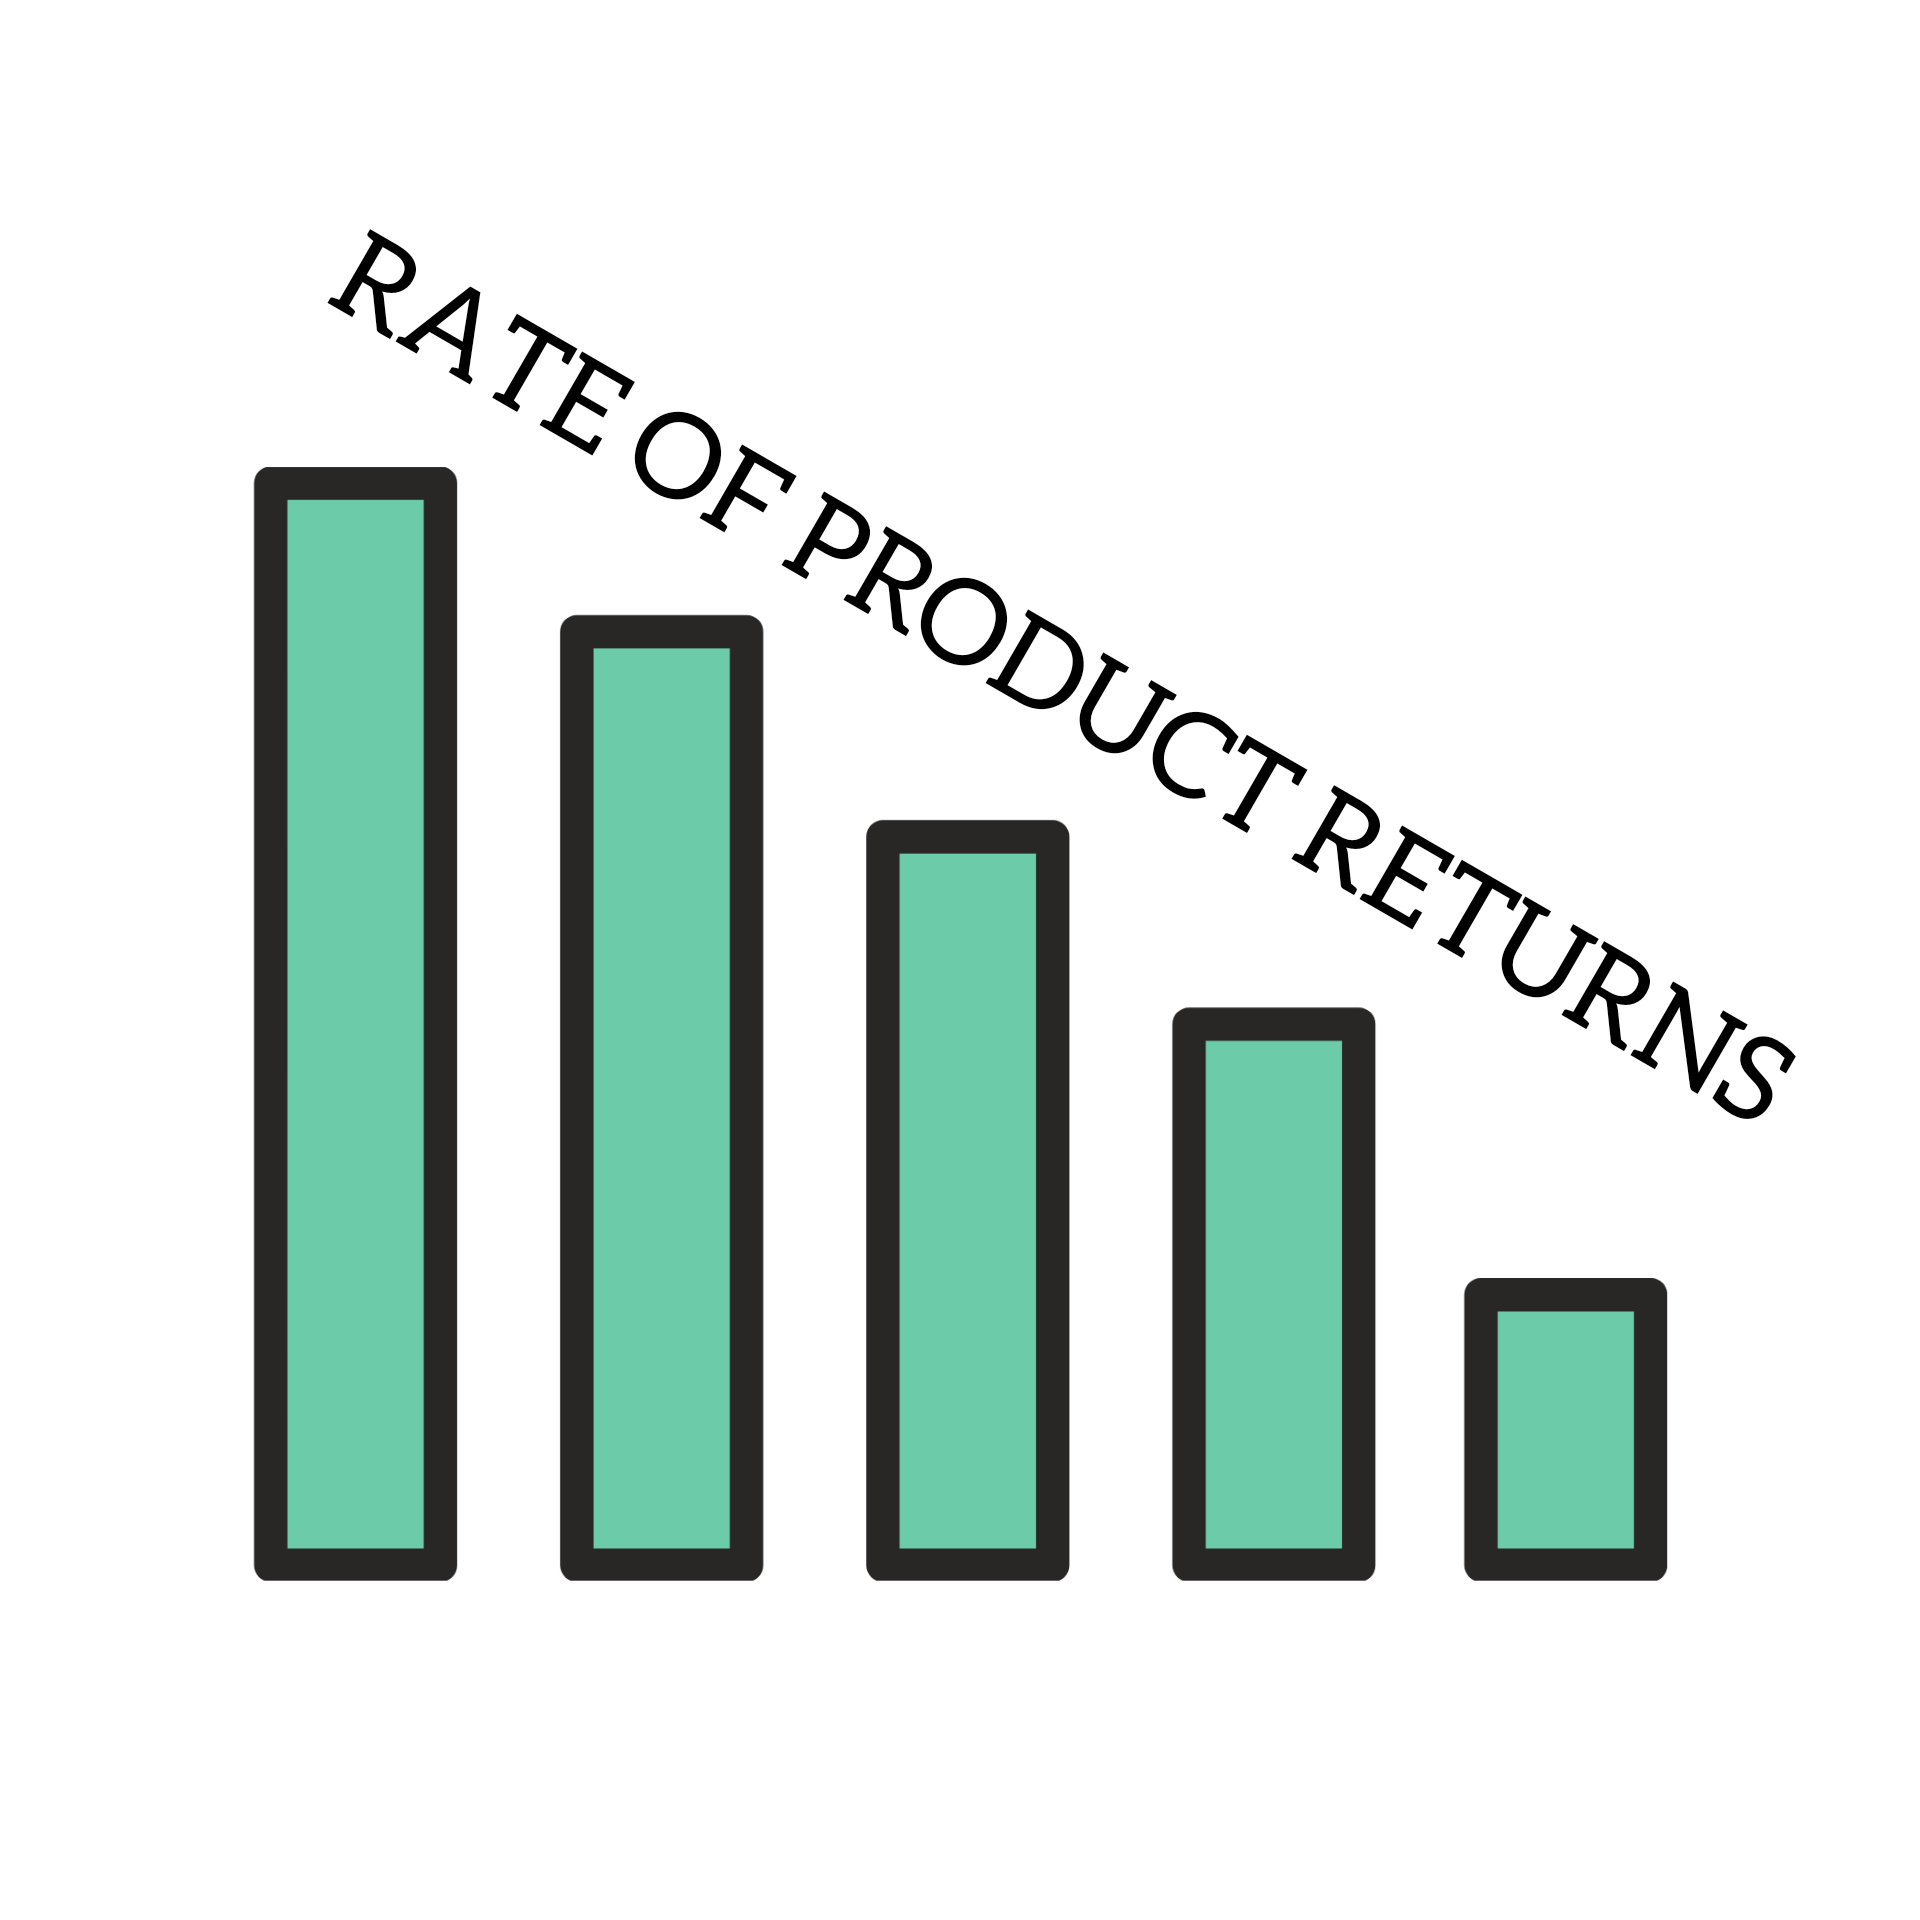 Product customization reduces the rate of product return